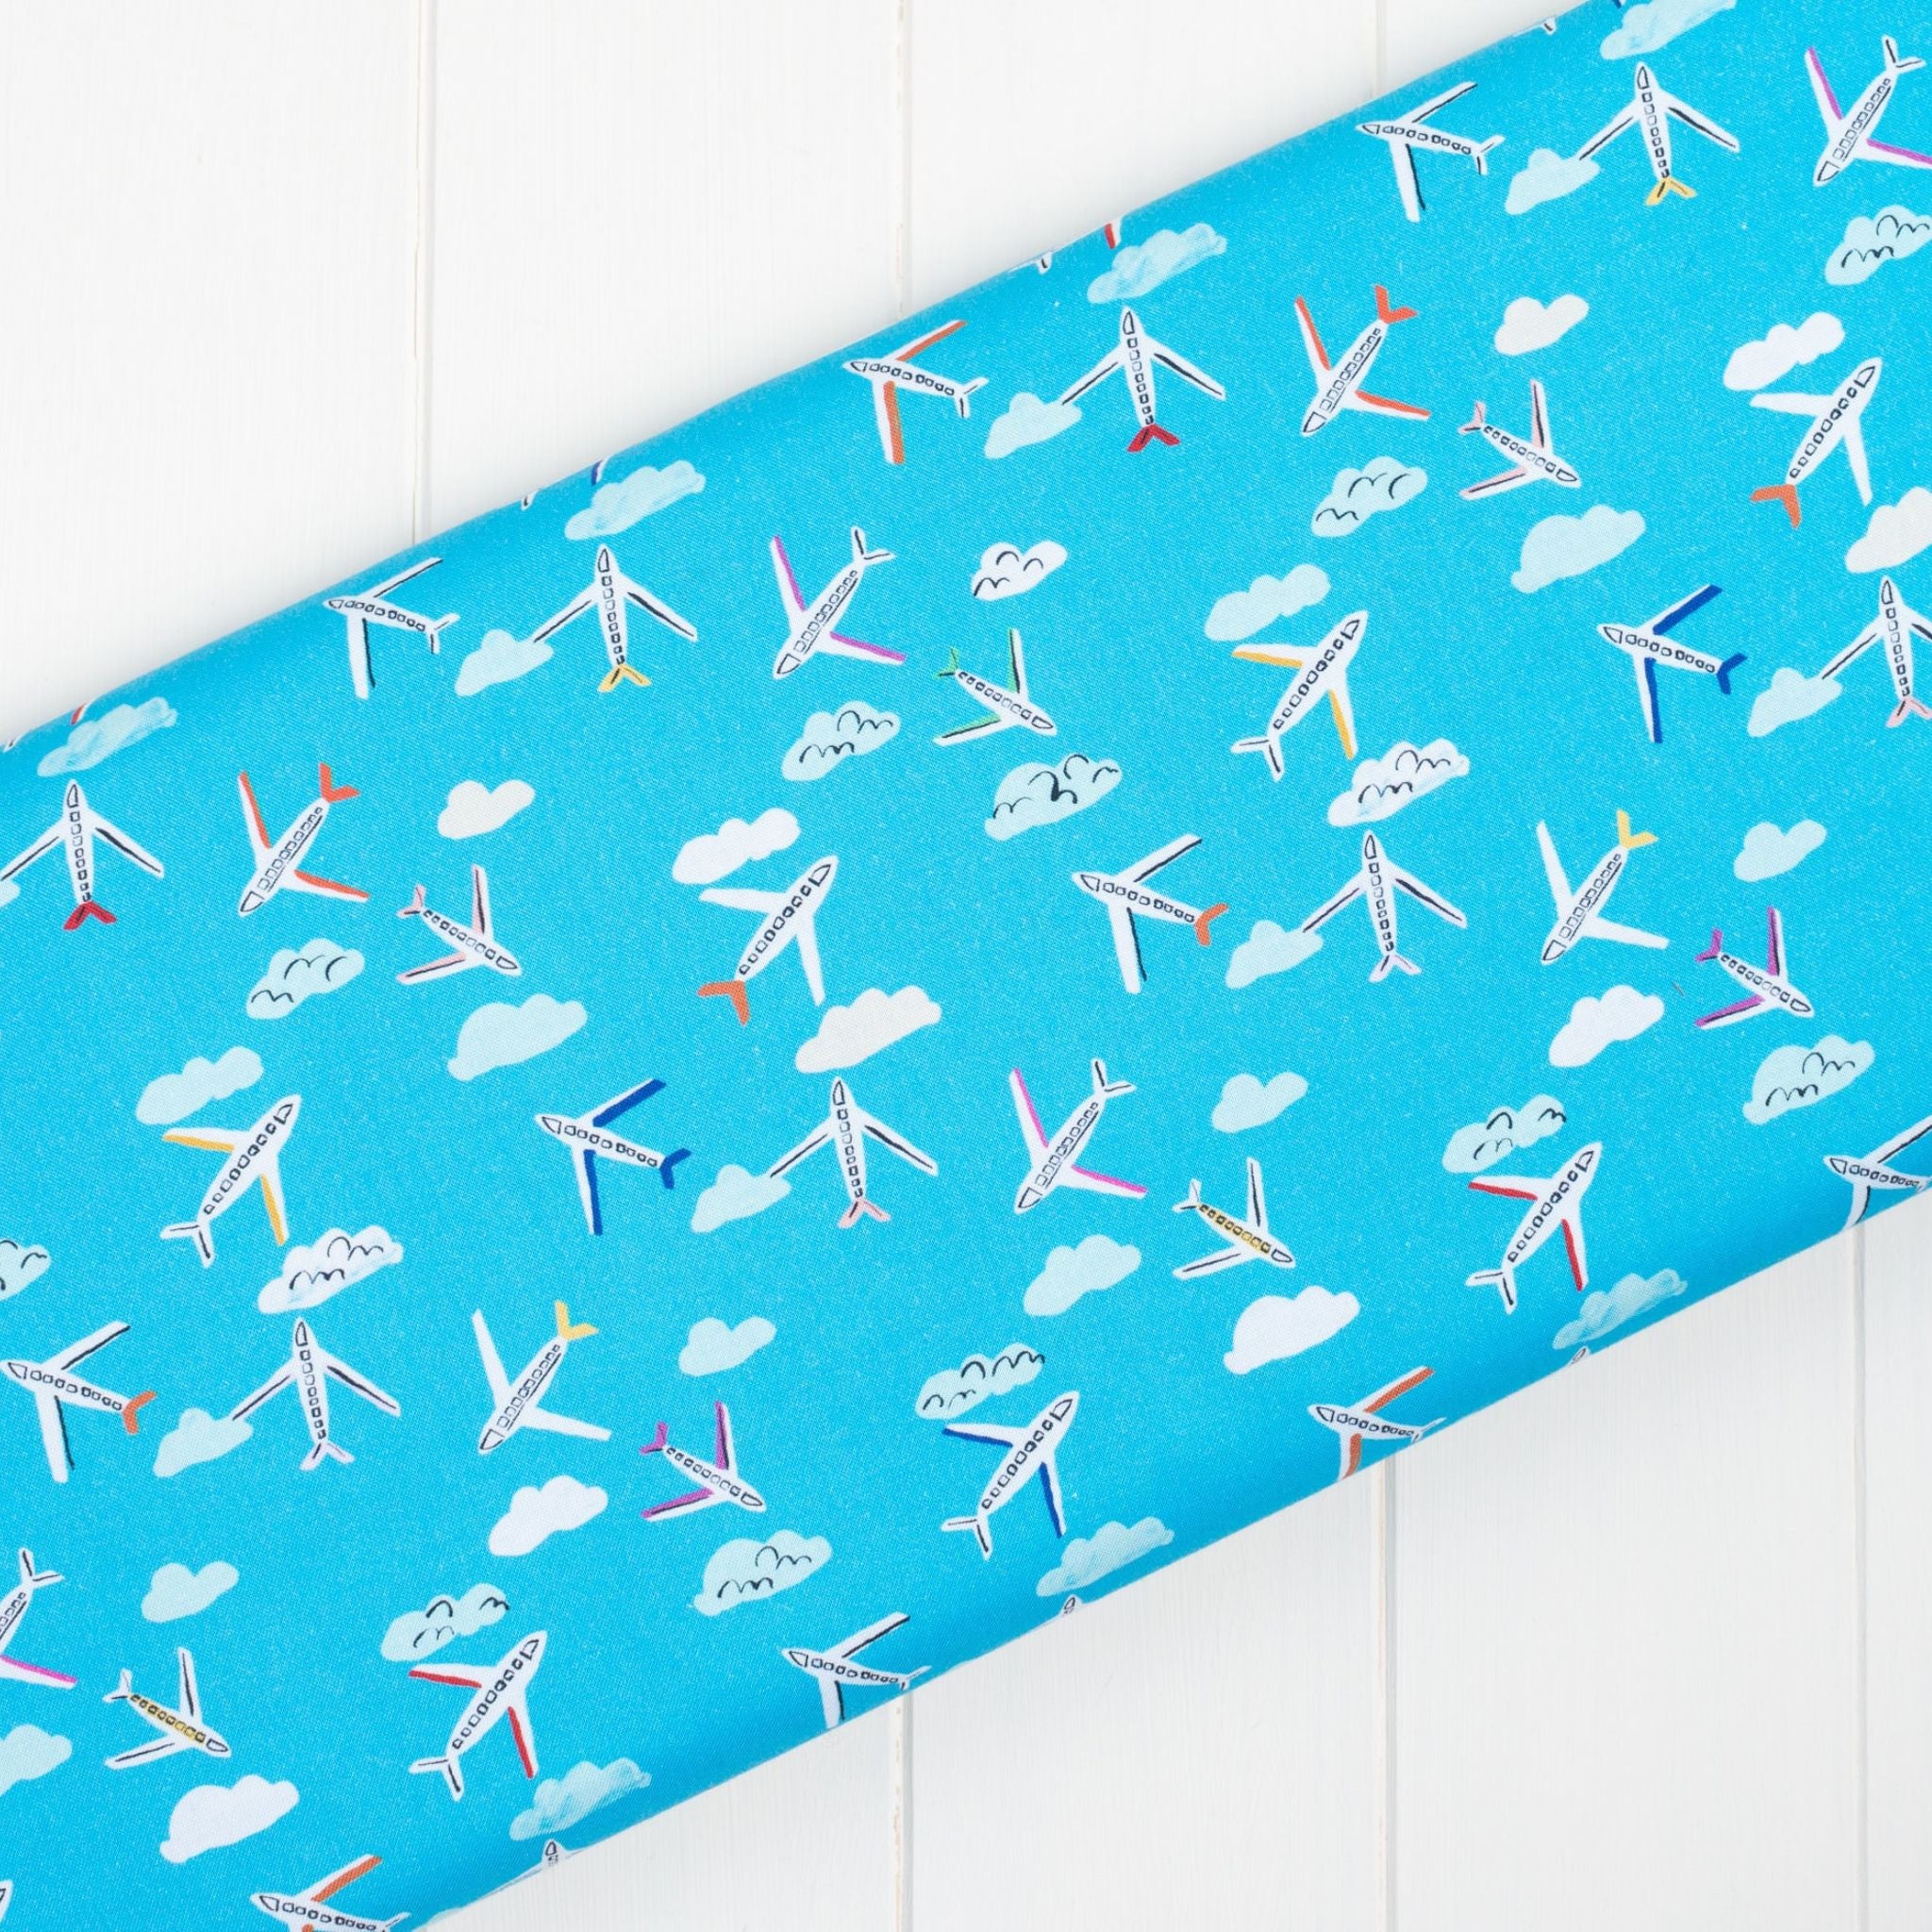 bright blue fabric with aeroplanes and clouds - Lazy Days by Dashwood Studio